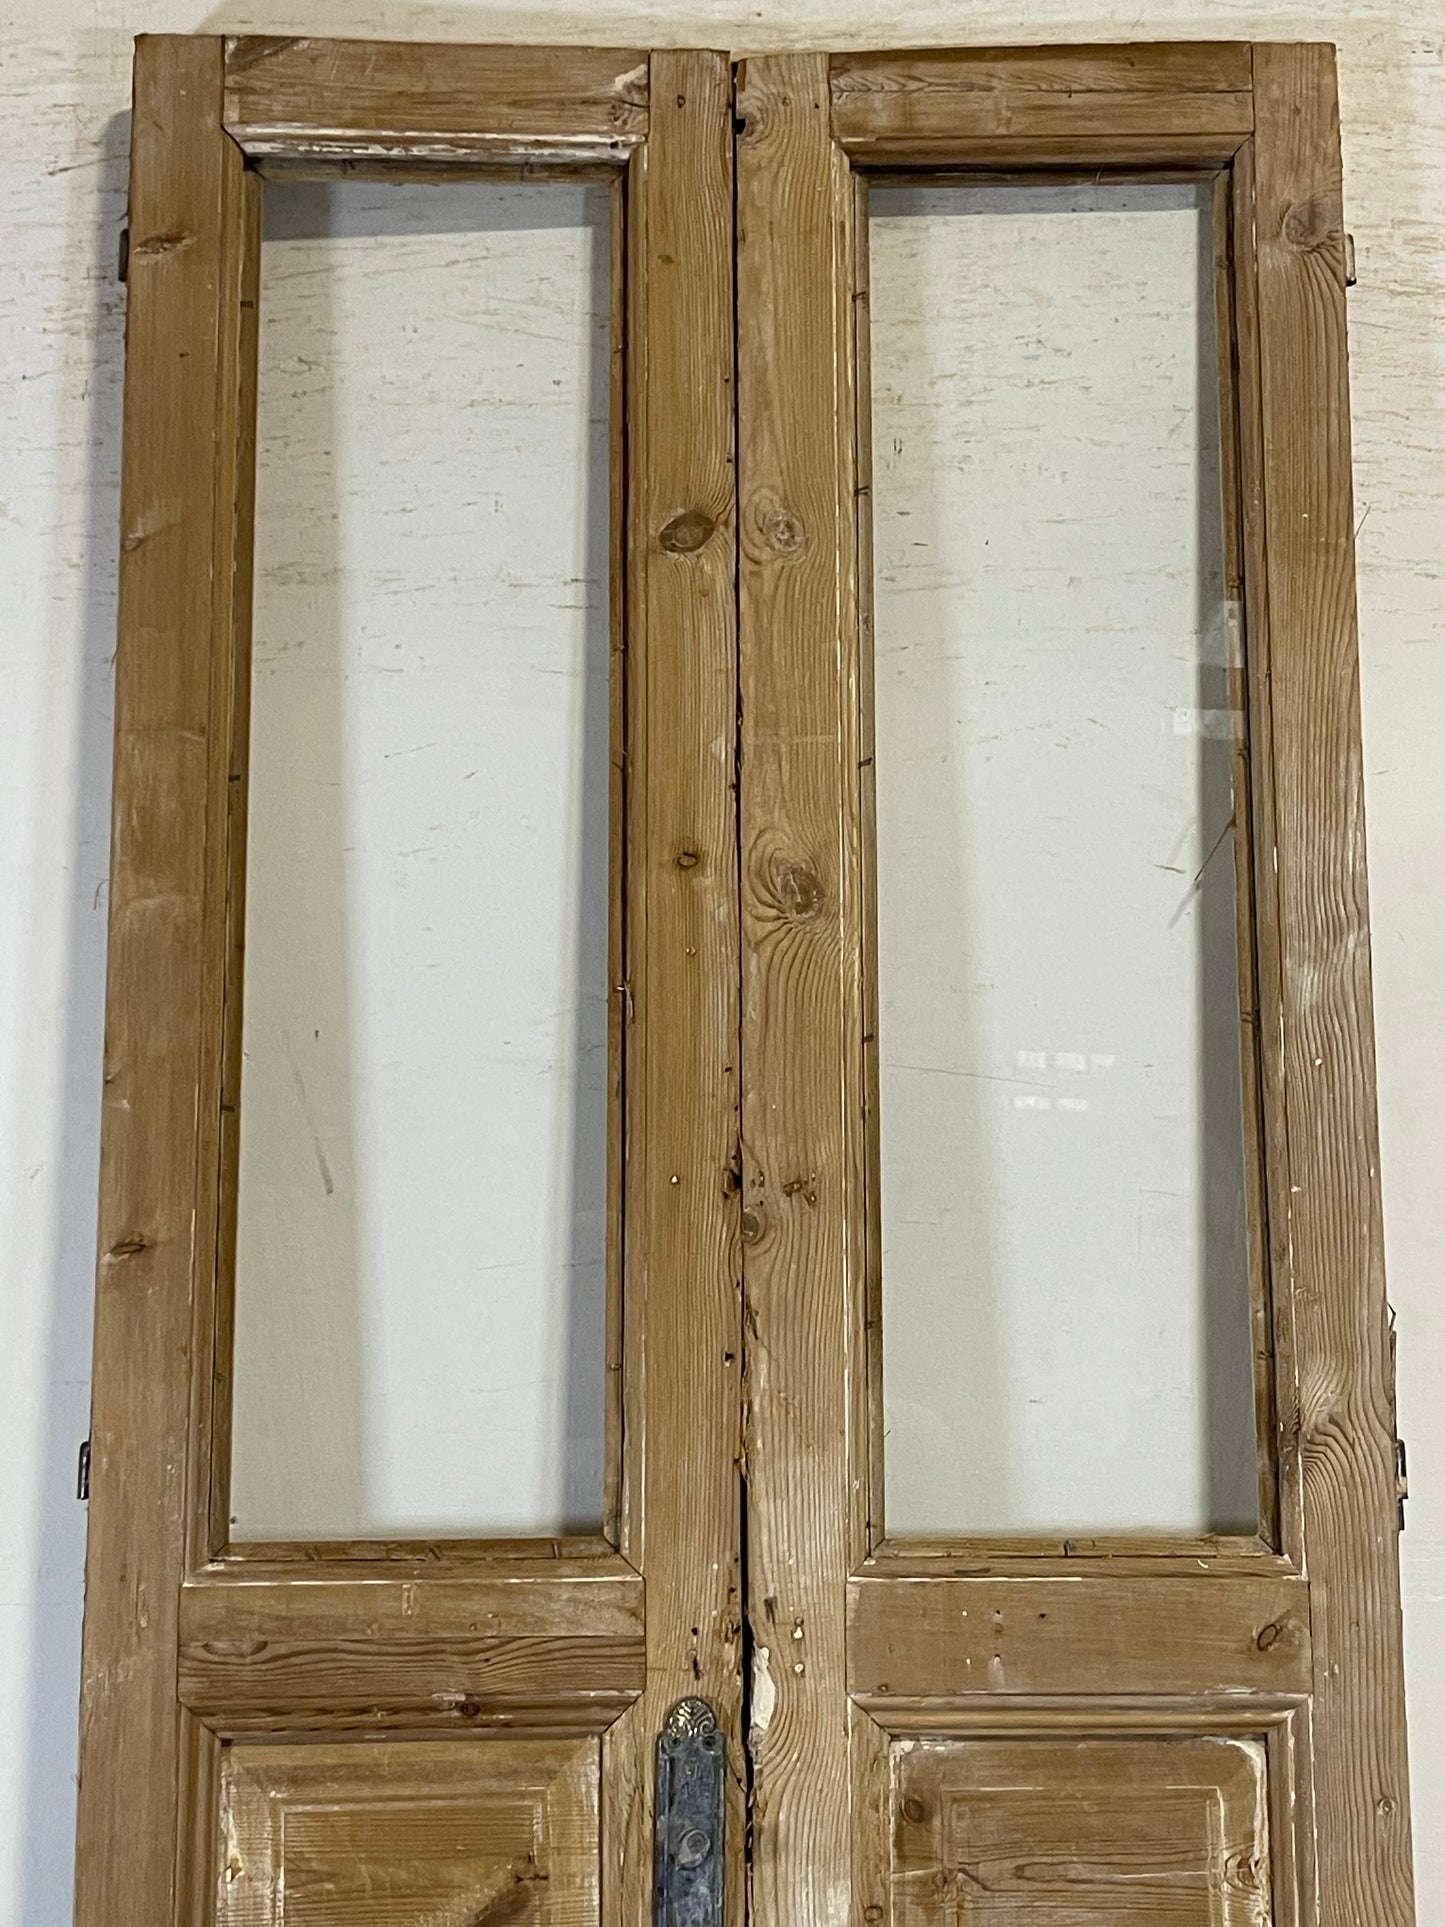 Antique French panel doors with glass (96x37.5) L187